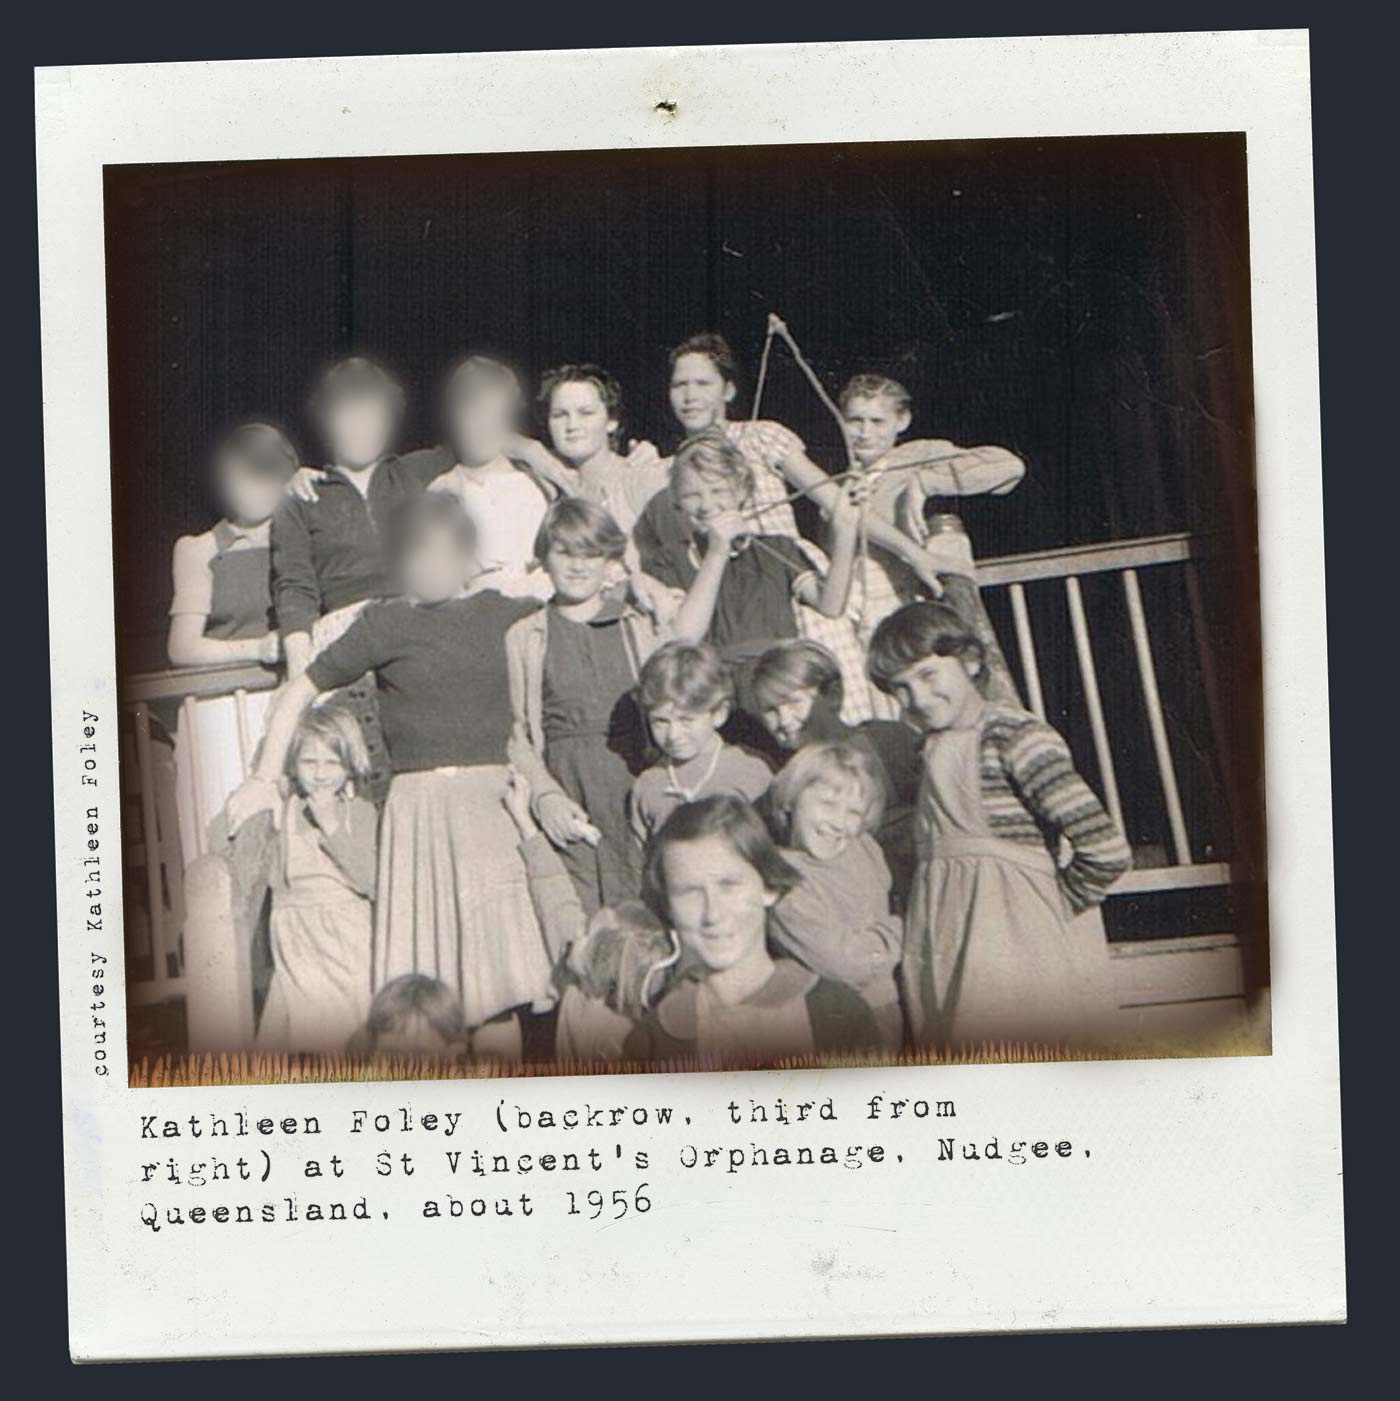 Polaroid photograph showing a group of girls standing at the front of a timber verandah rail. One of the girls holds a small bow and arrow. Some of the older girls' faces have been blurred. Typewritten text at the bottom reads 'Kathleen Foley (back row, third from right) at St Vincent's Orphanage, Nudgee, Queensland, about 1956'. 'Courtesy Kathleen Foley' is typed along the left side. - click to view larger image